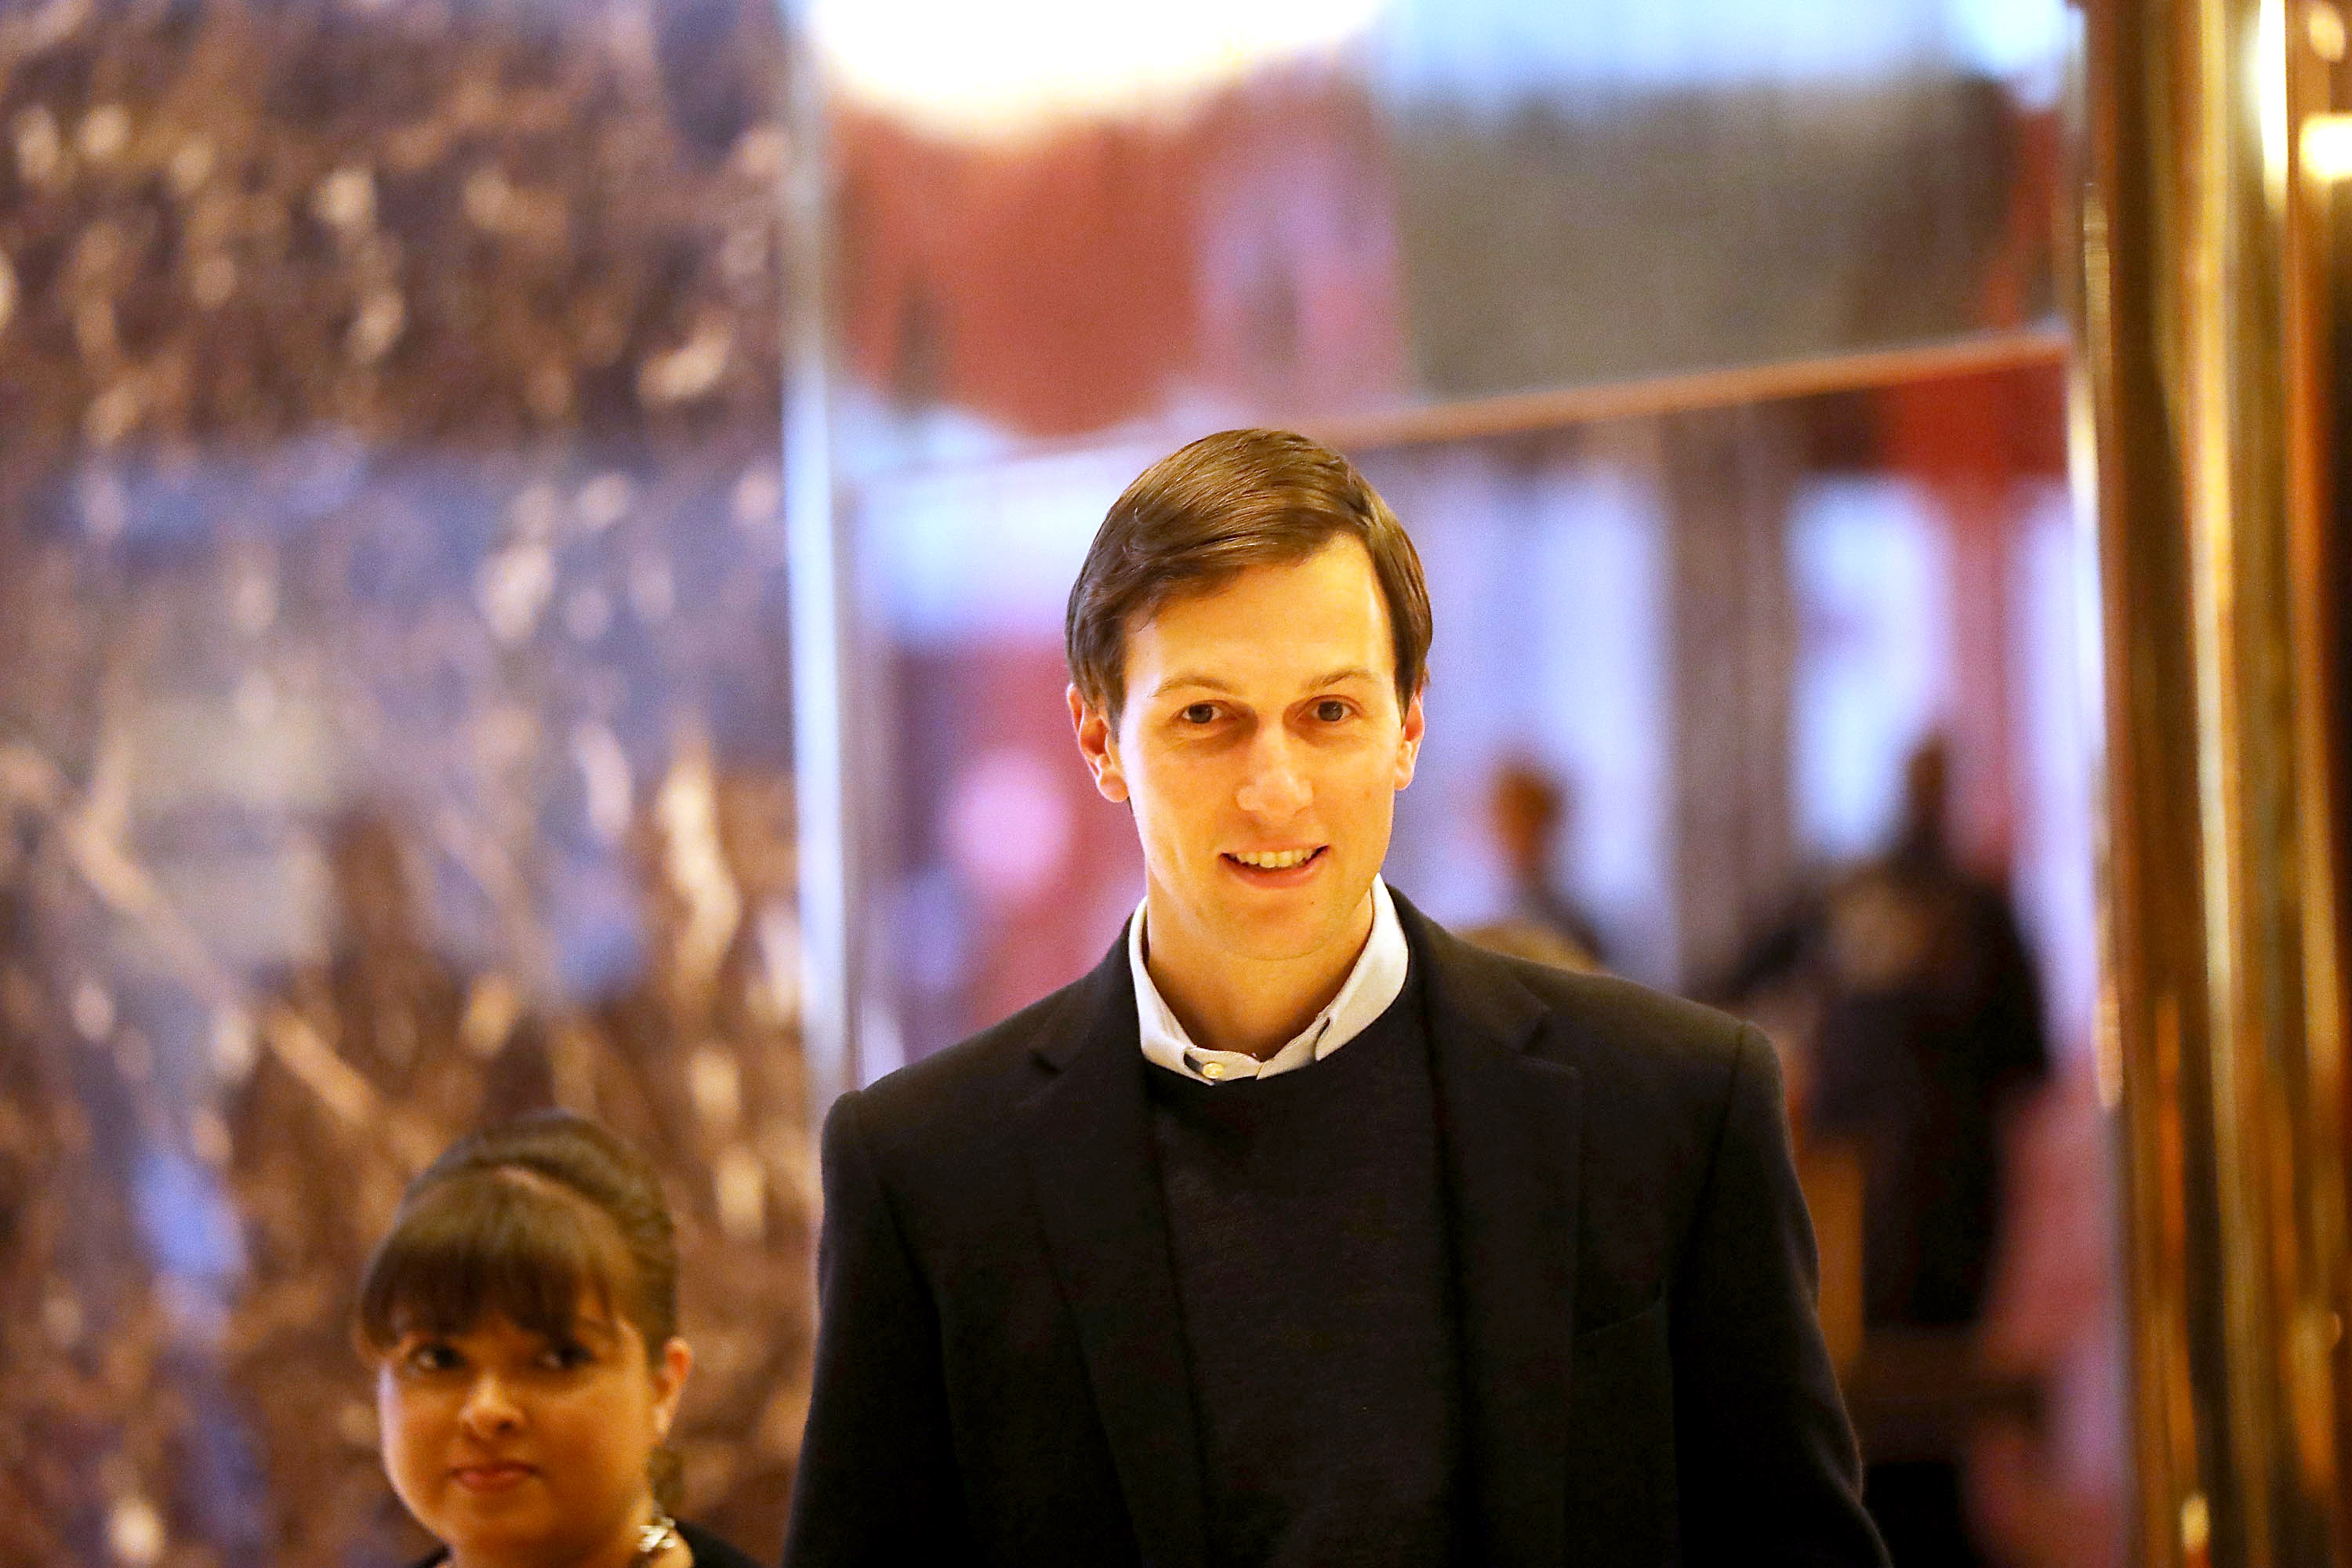 NEW YORK, NY - NOVEMBER 18: Jared Kushner, the son-in-law of President-elect Donald Trump, walks through the lobby of Trump Tower on November 18, 2016 in New York City. President-elect Trump and his transition team are in the process of filling cabinet and other high level positions for the new administration.   Spencer Platt/Getty Images/AFP